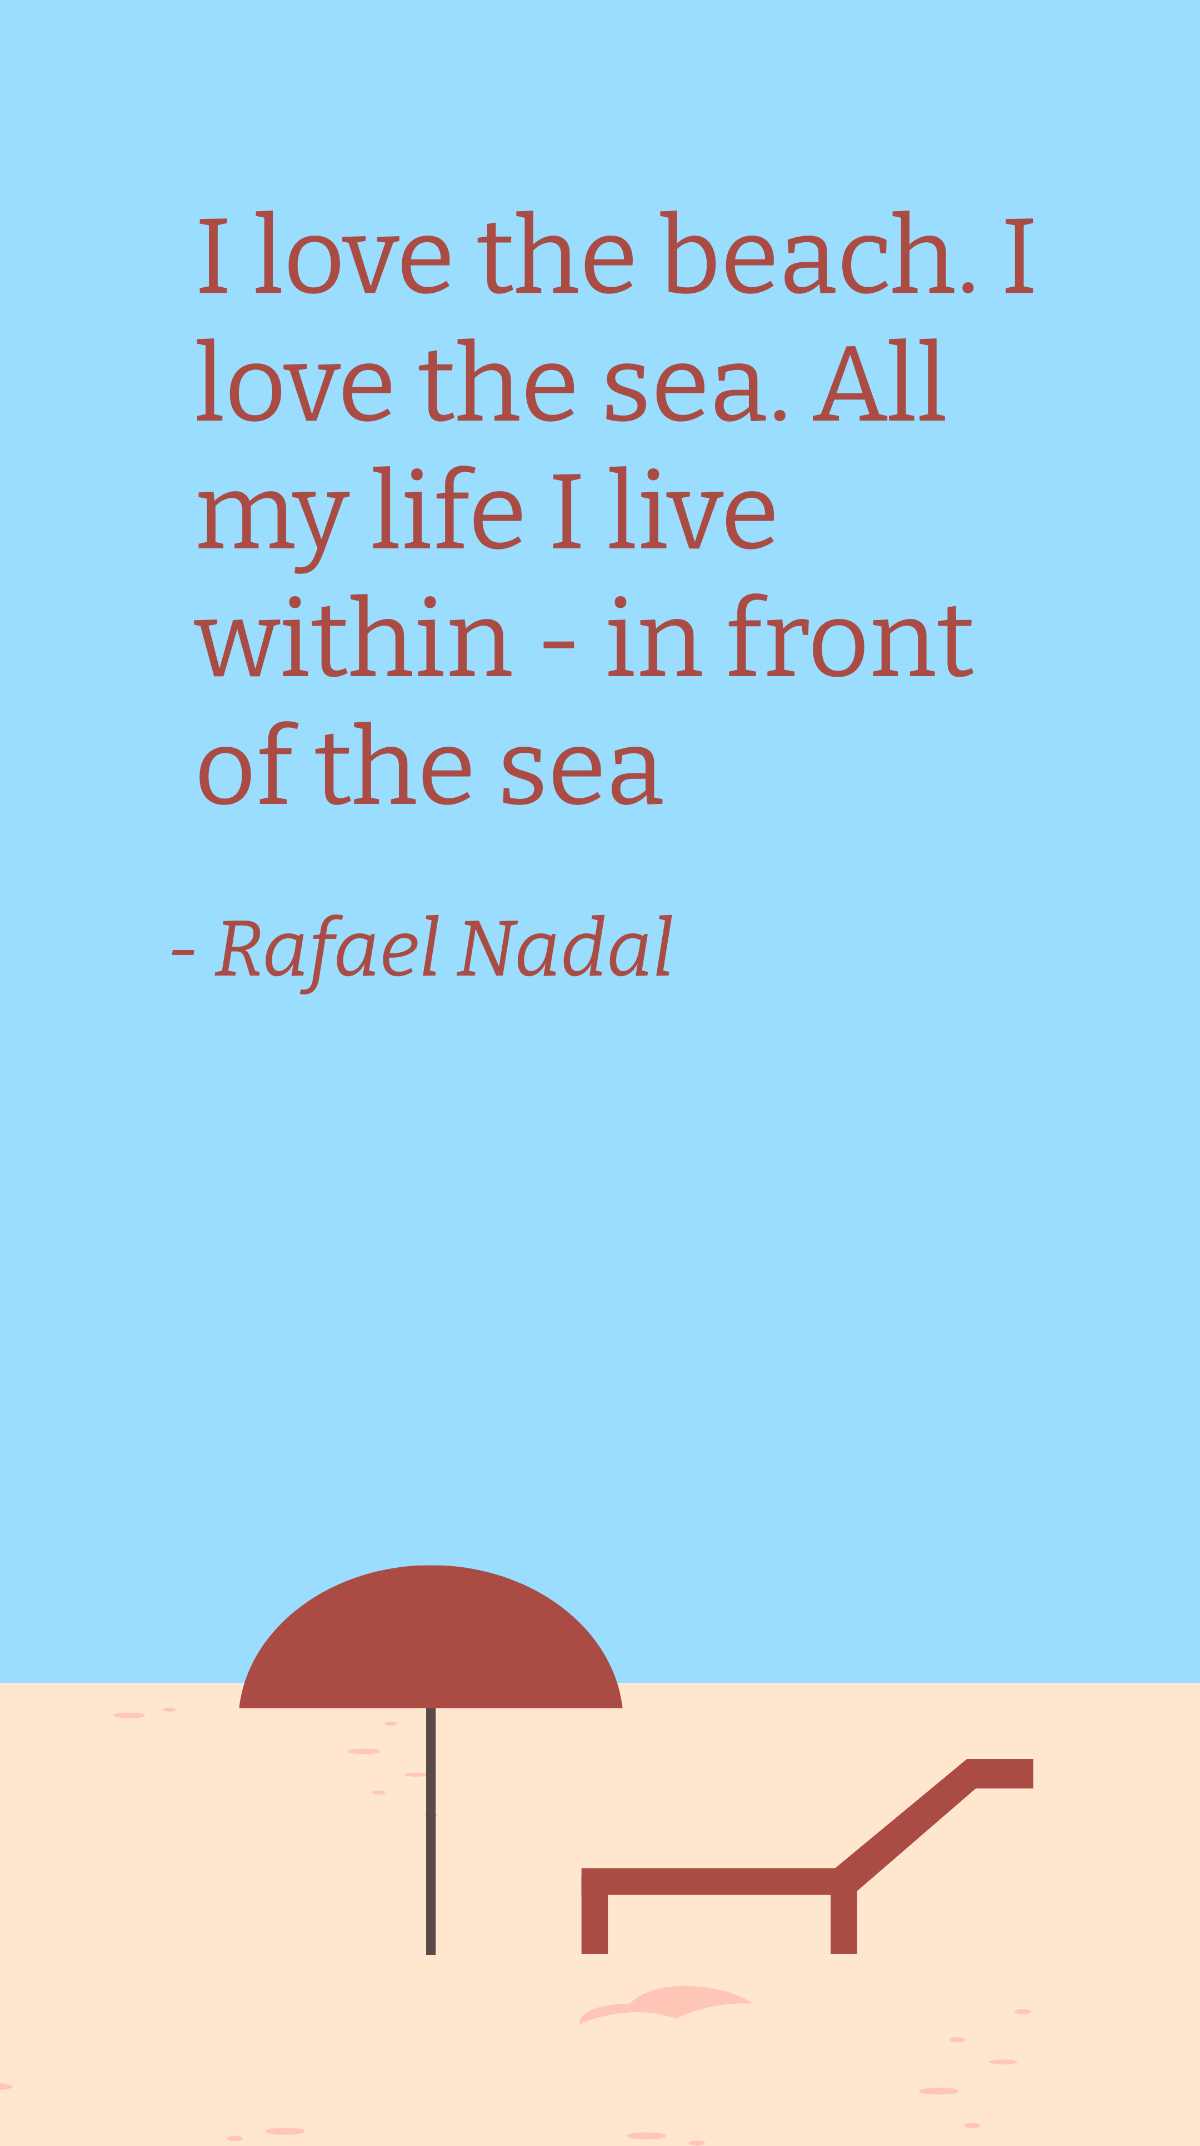 Rafael Nadal - I love the beach. I love the sea. All my life I live within - in front of the sea Template